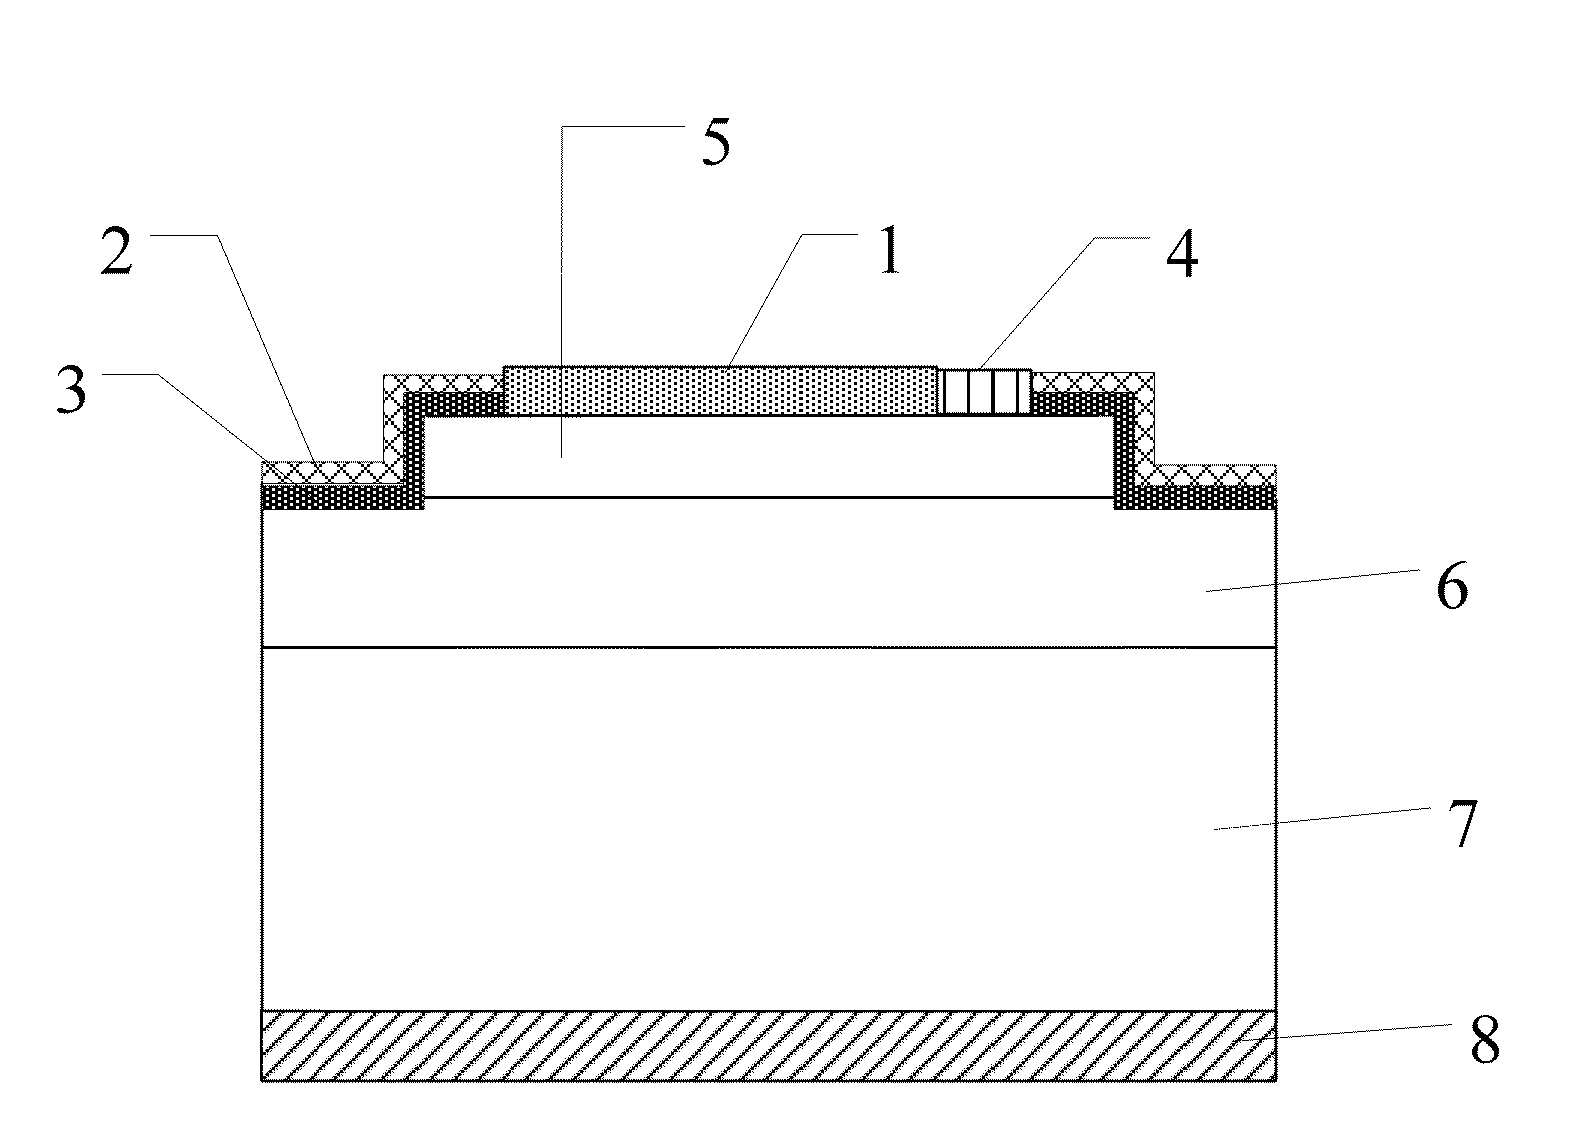 I-Layer Vanadium-Doped Pin Type Nuclear Battery and the Preparation Process Thereof